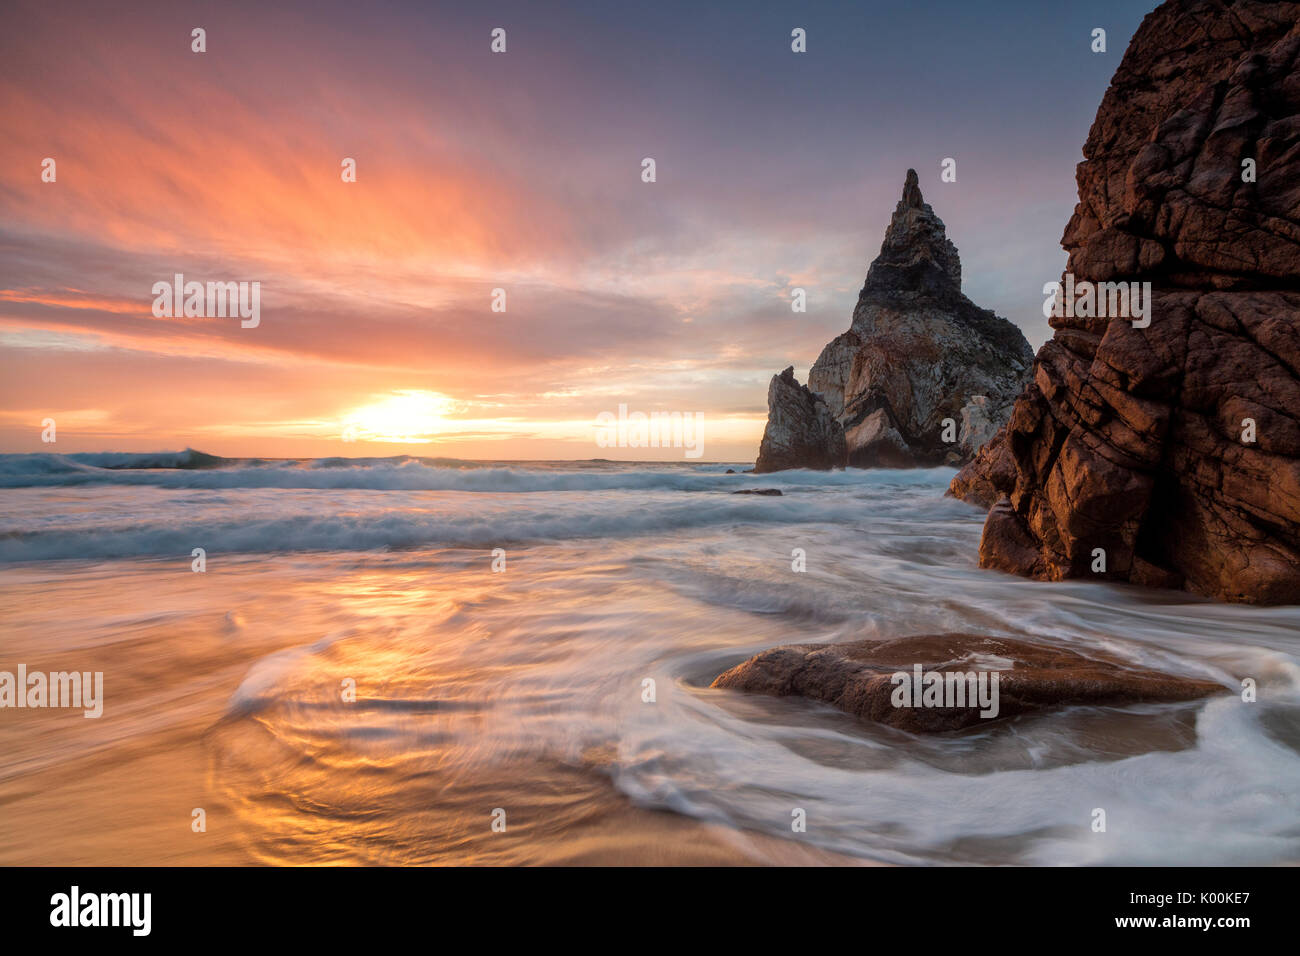 The fiery sky at sunset is reflected on the ocean waves and cliffs Praia da  Ursa Cabo da Roca Colares Sintra Portugal Europe Stock Photo - Alamy